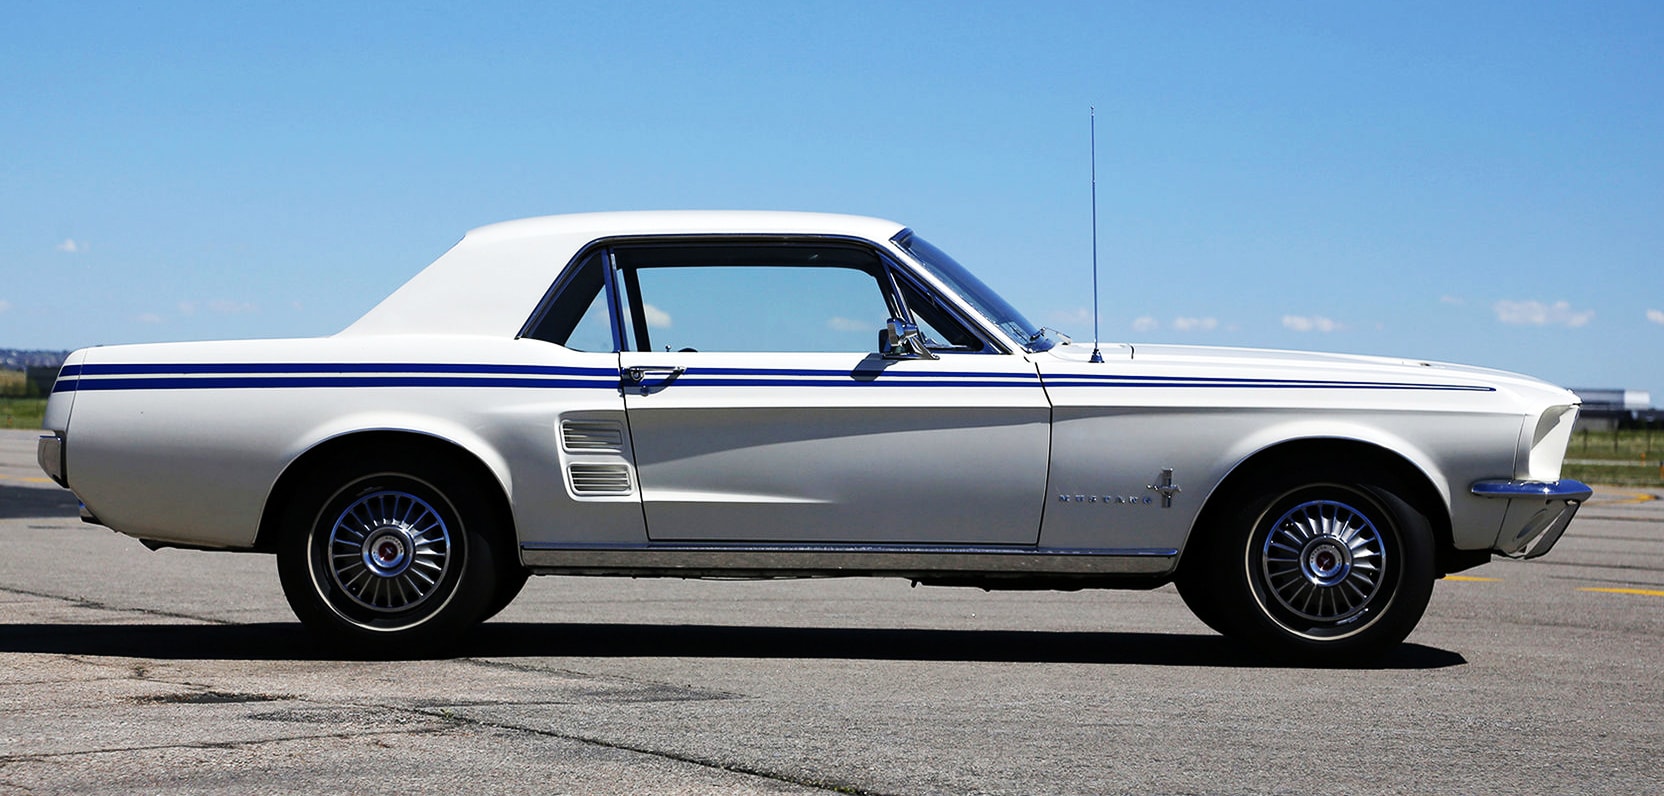 Especial Mustang Indy Pacesetter 1967